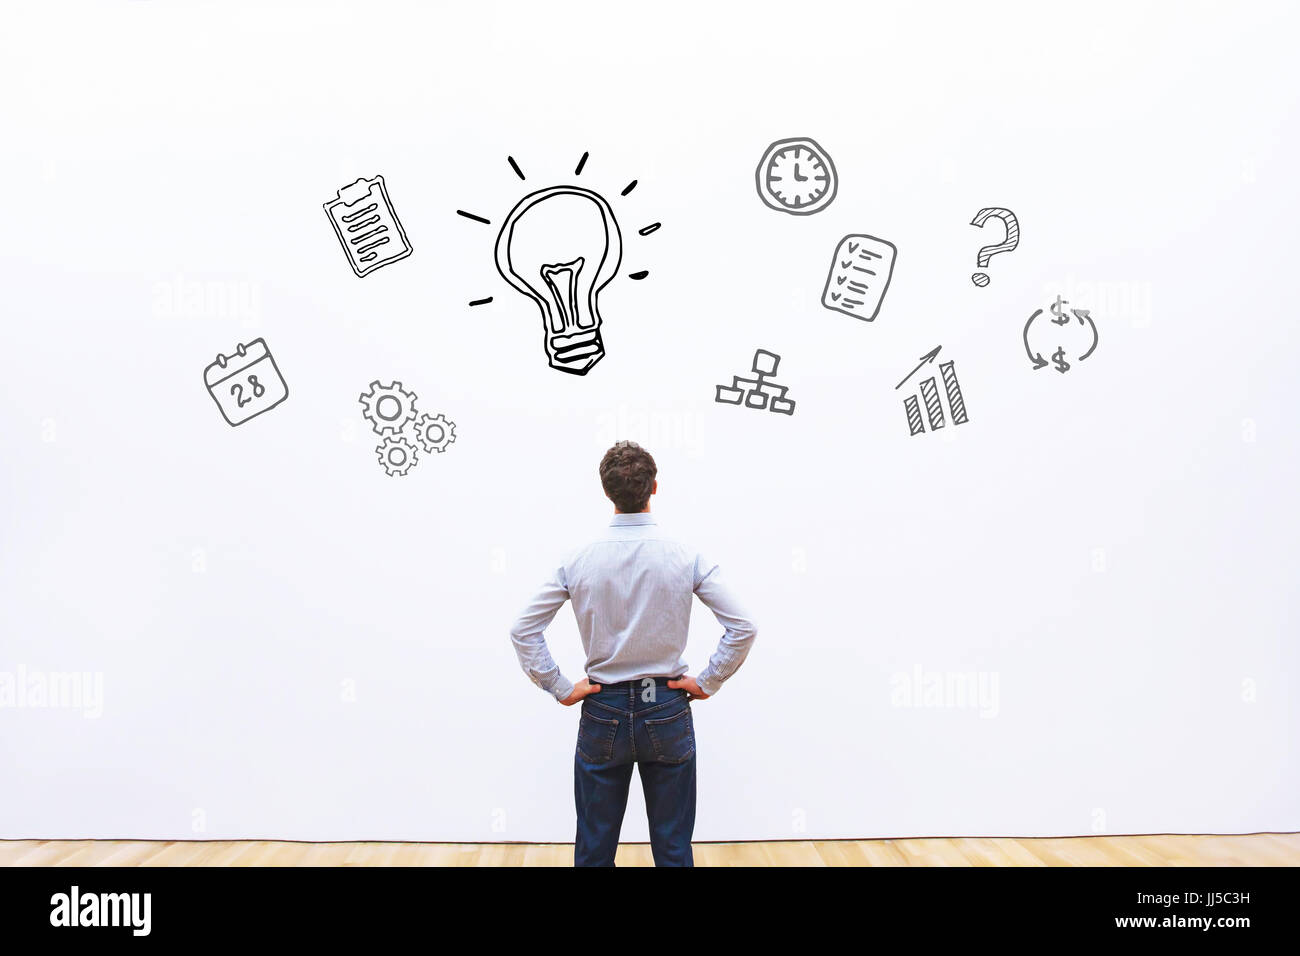 idea or innovation concept, businessman looking at the sketch on white background Stock Photo